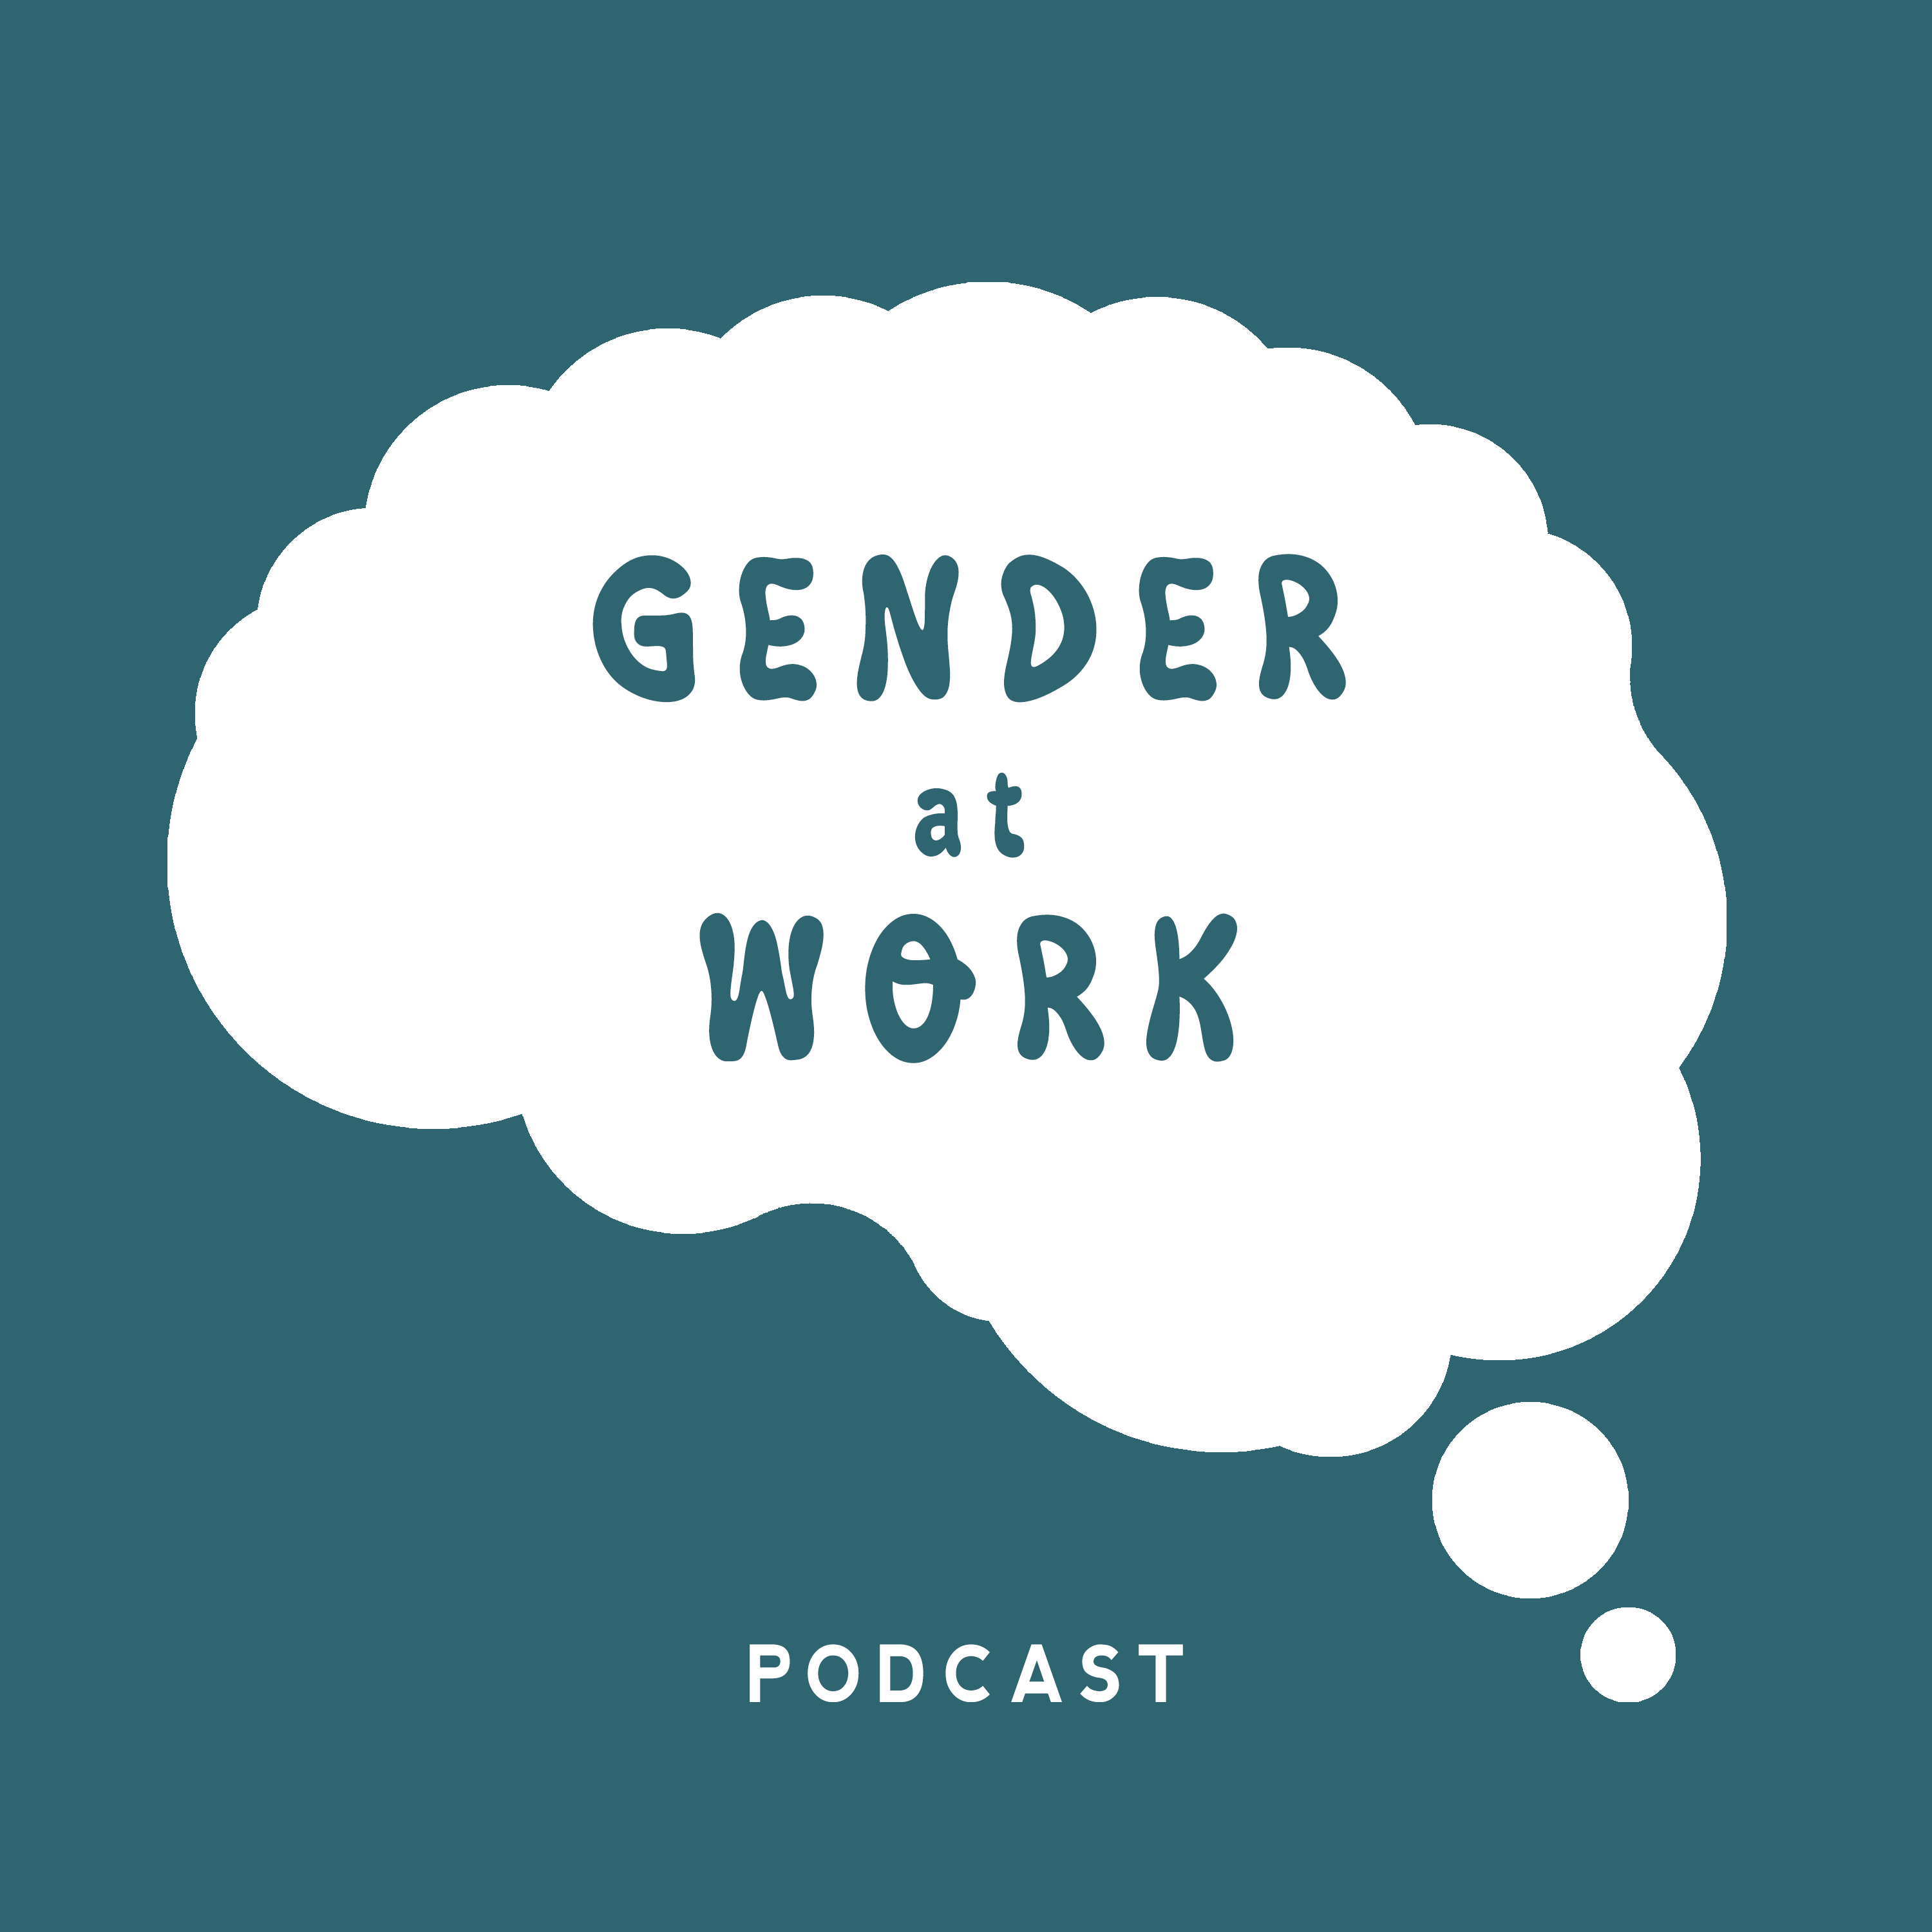 Floating thought bubble with text: gender at work podcast